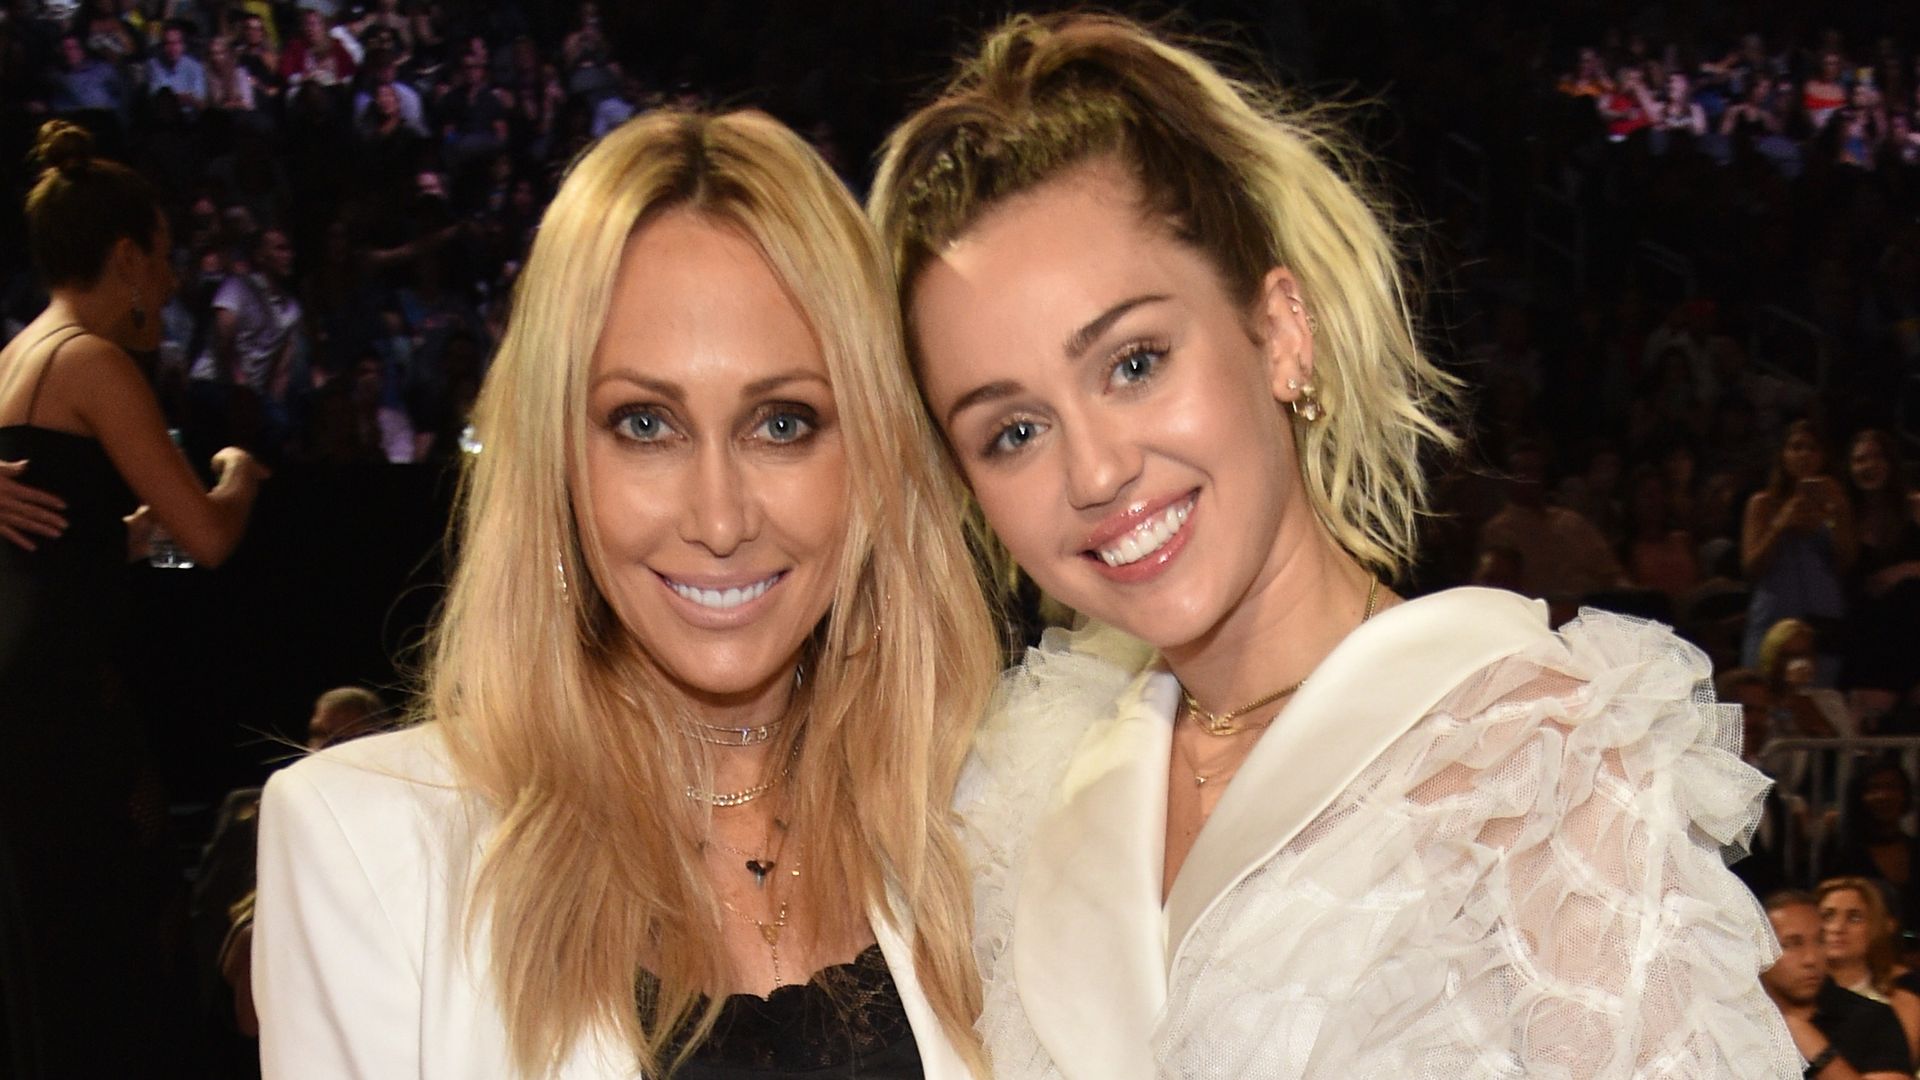 LAS VEGAS, NV - MAY 21:  Tish Cyrus (L) and recording artist Miley Cyrus attend the 2017 Billboard Music Awards at T-Mobile Arena on May 21, 2017 in Las Vegas, Nevada.  (Photo by Kevin Mazur/BBMA2017/Getty Images for dcp)